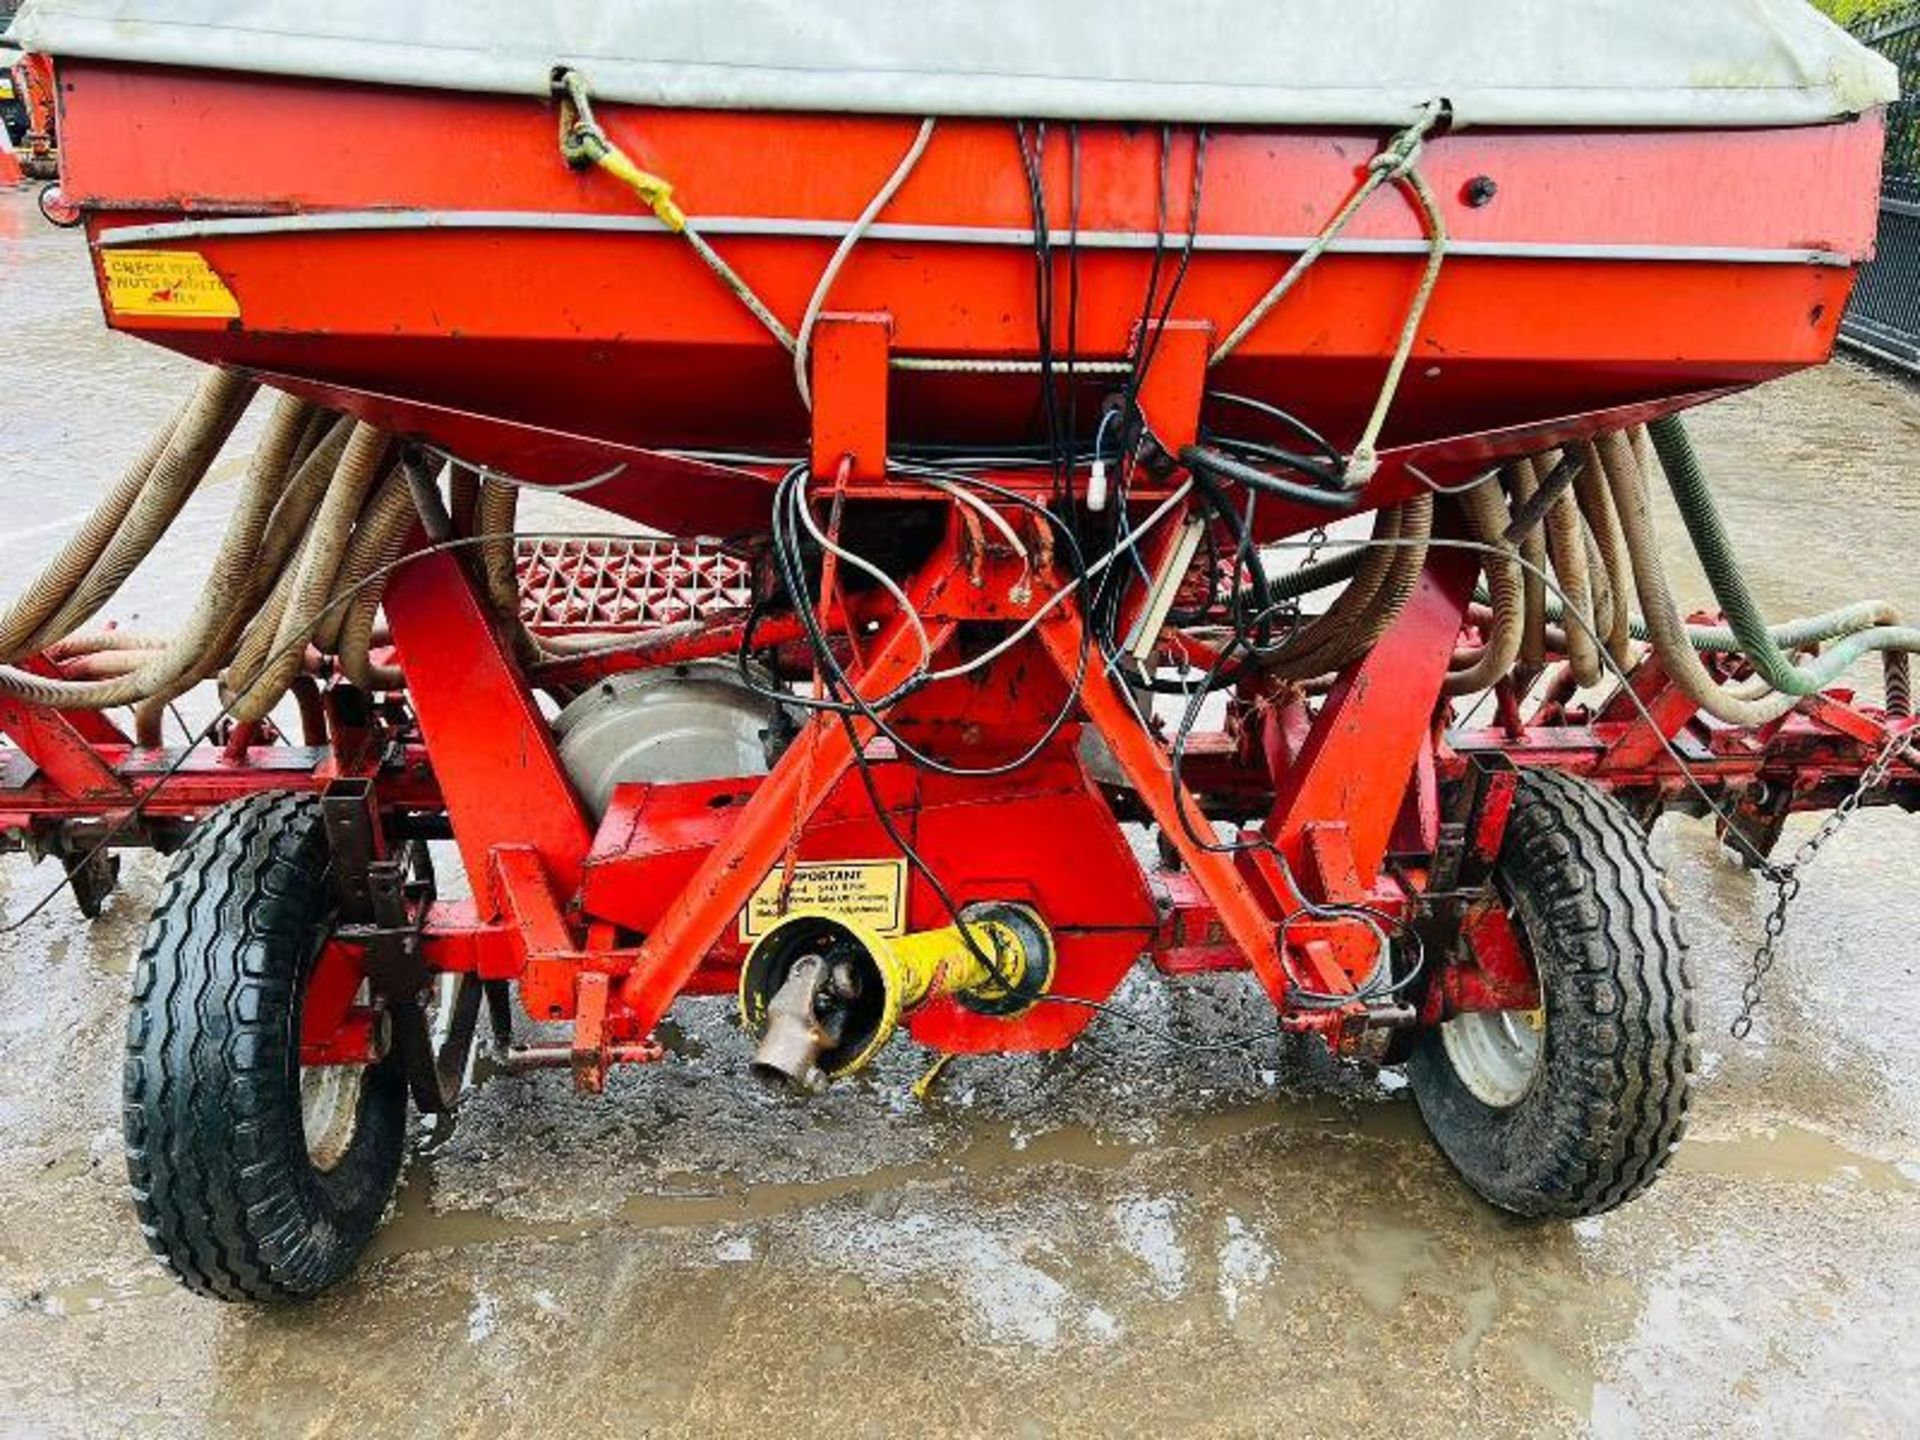 ACCORD TYPE D SEED DRILL C/W EXTENDABLE ARMS - Image 9 of 10